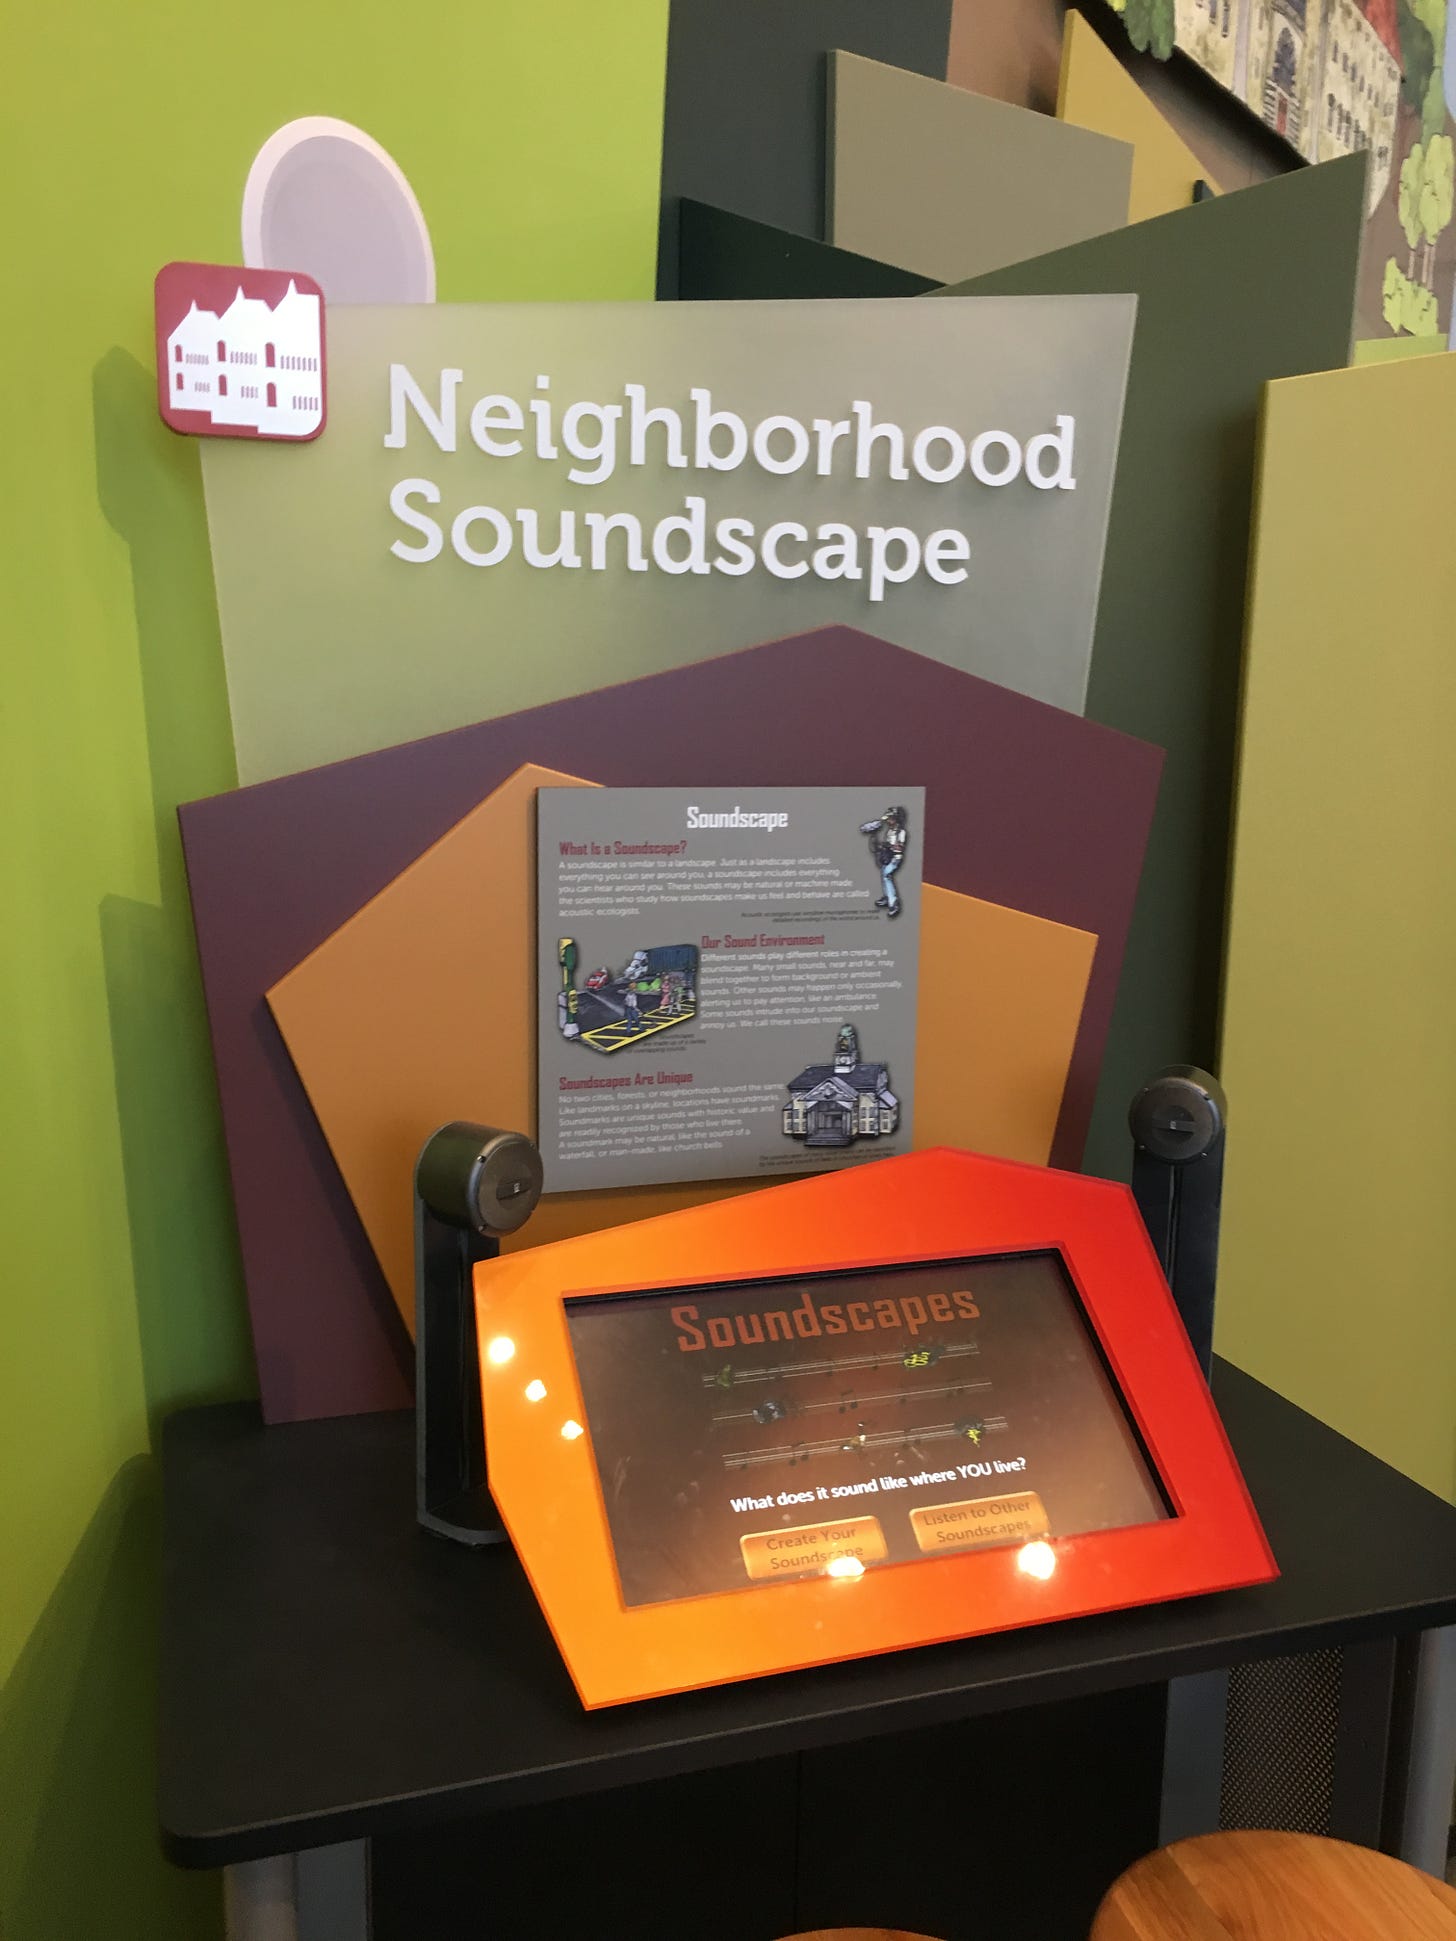 The NIeghborhood Soundscape interactive from the City Science exhibtion